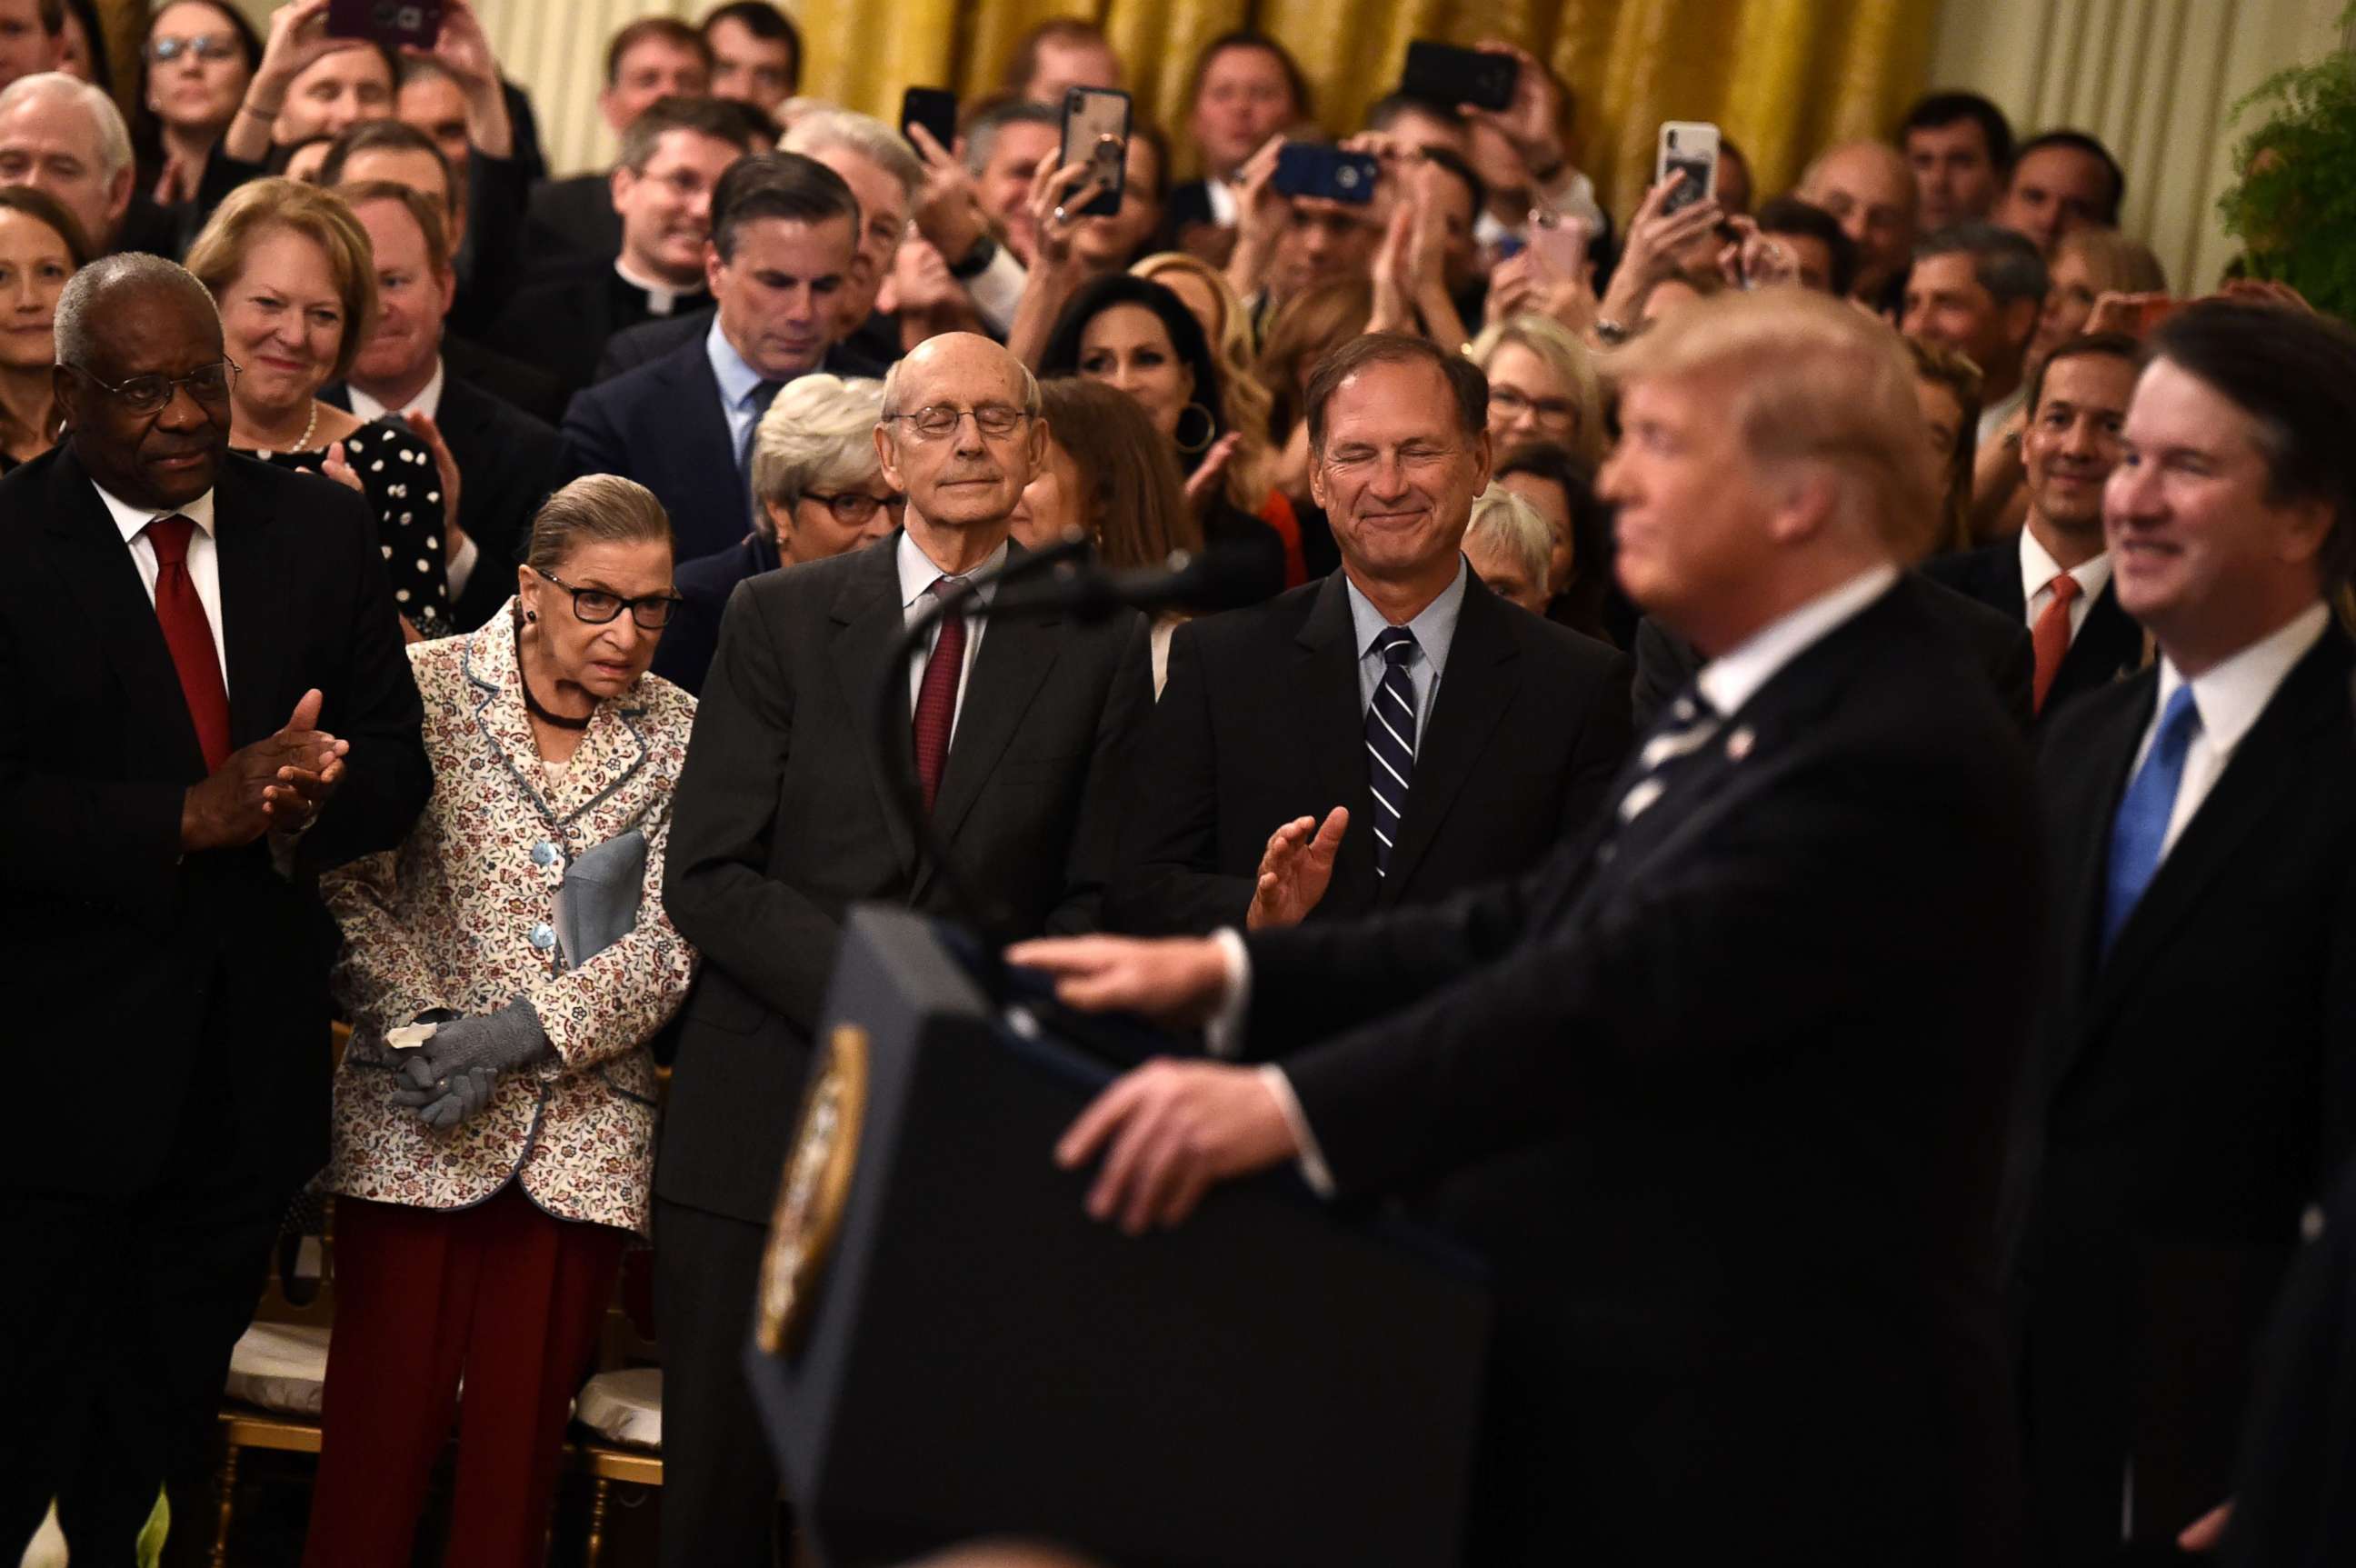 PHOTO: Supreme Court Associate Justices Clarence Thomas, Ruth Bader Ginsburg, Stephen Breyer and Samuel Alito listen as President Trump speaks during the swearing-in of Brett Kavanaugh as Associate Justice in Washington, Oct. 8, 2018. 